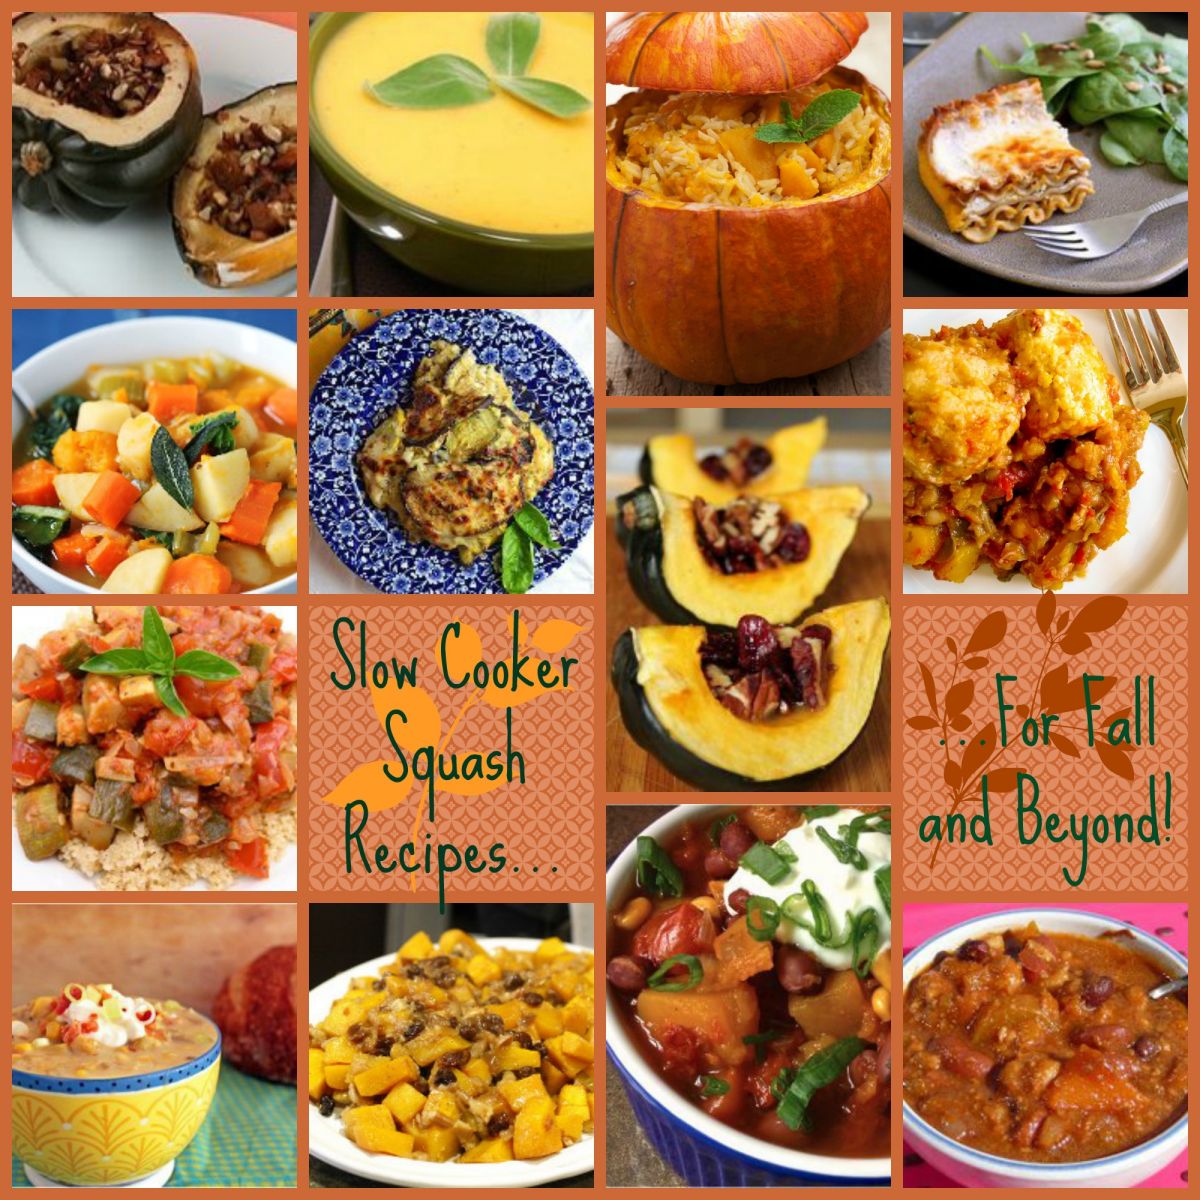 Slow Cooker Squash Recipes for Fall and Beyond